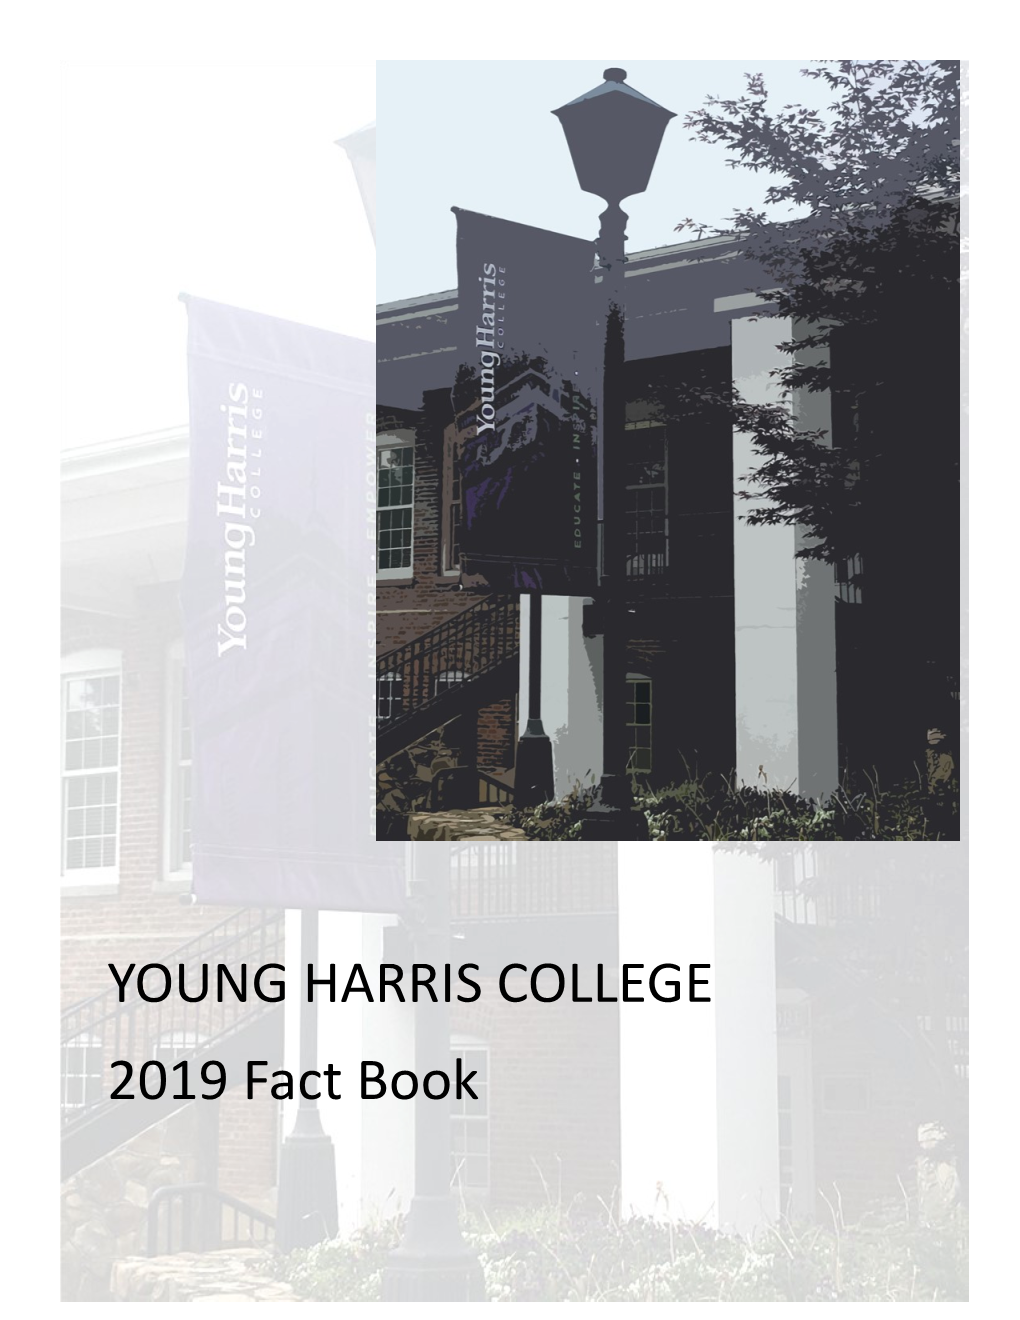 YOUNG HARRIS COLLEGE 2019 Fact Book